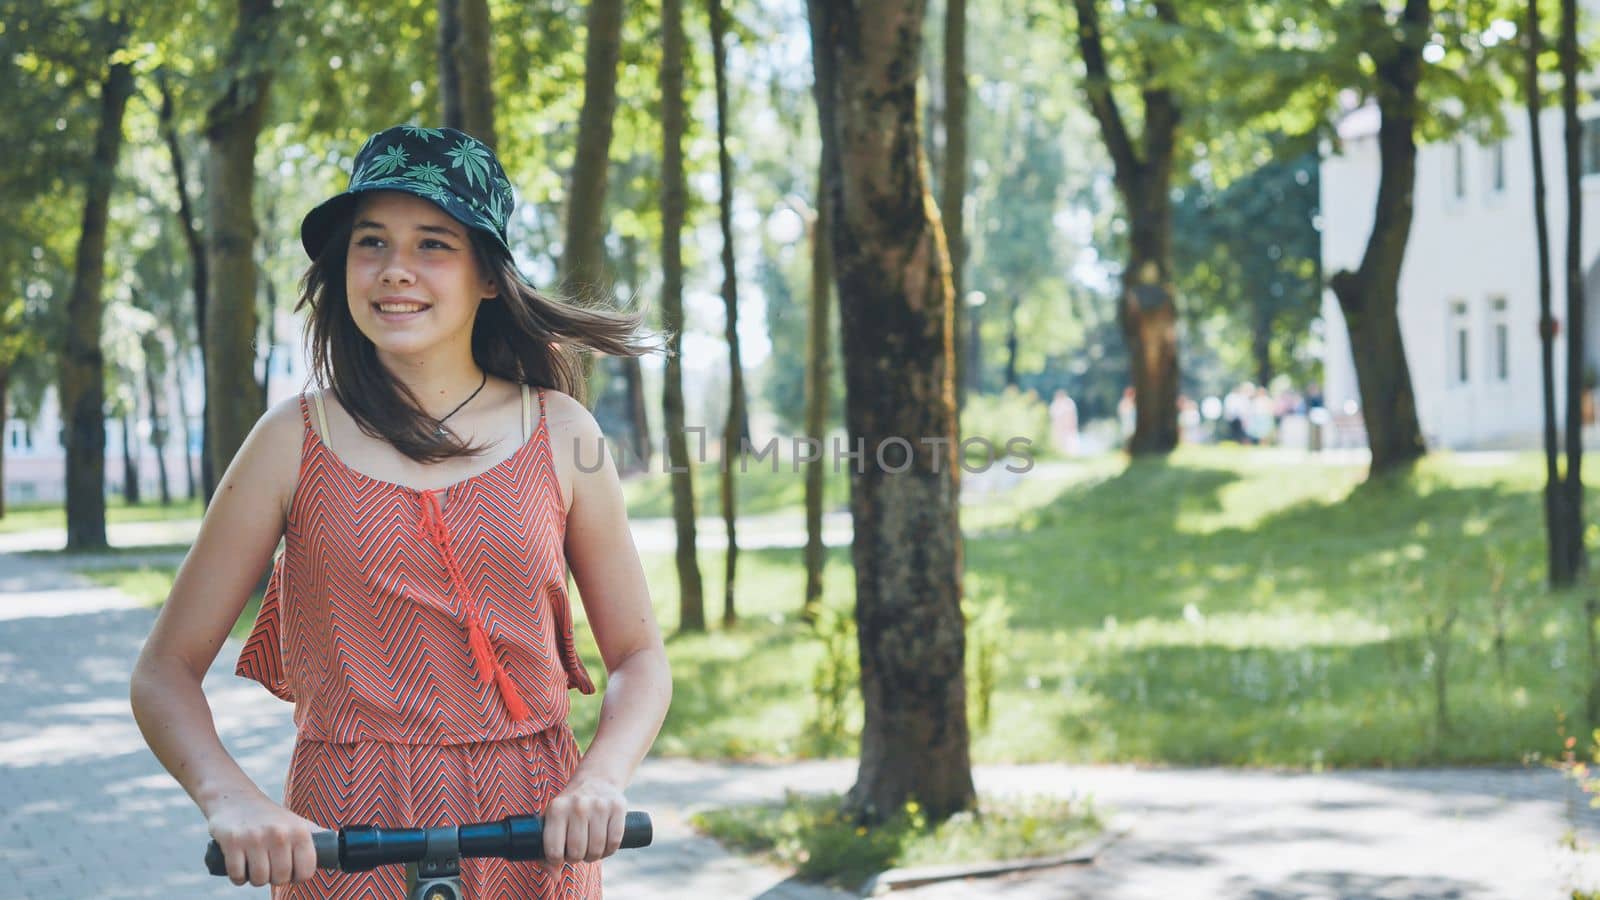 Portrait of a girl on an electric scooter riding in a park in the summer